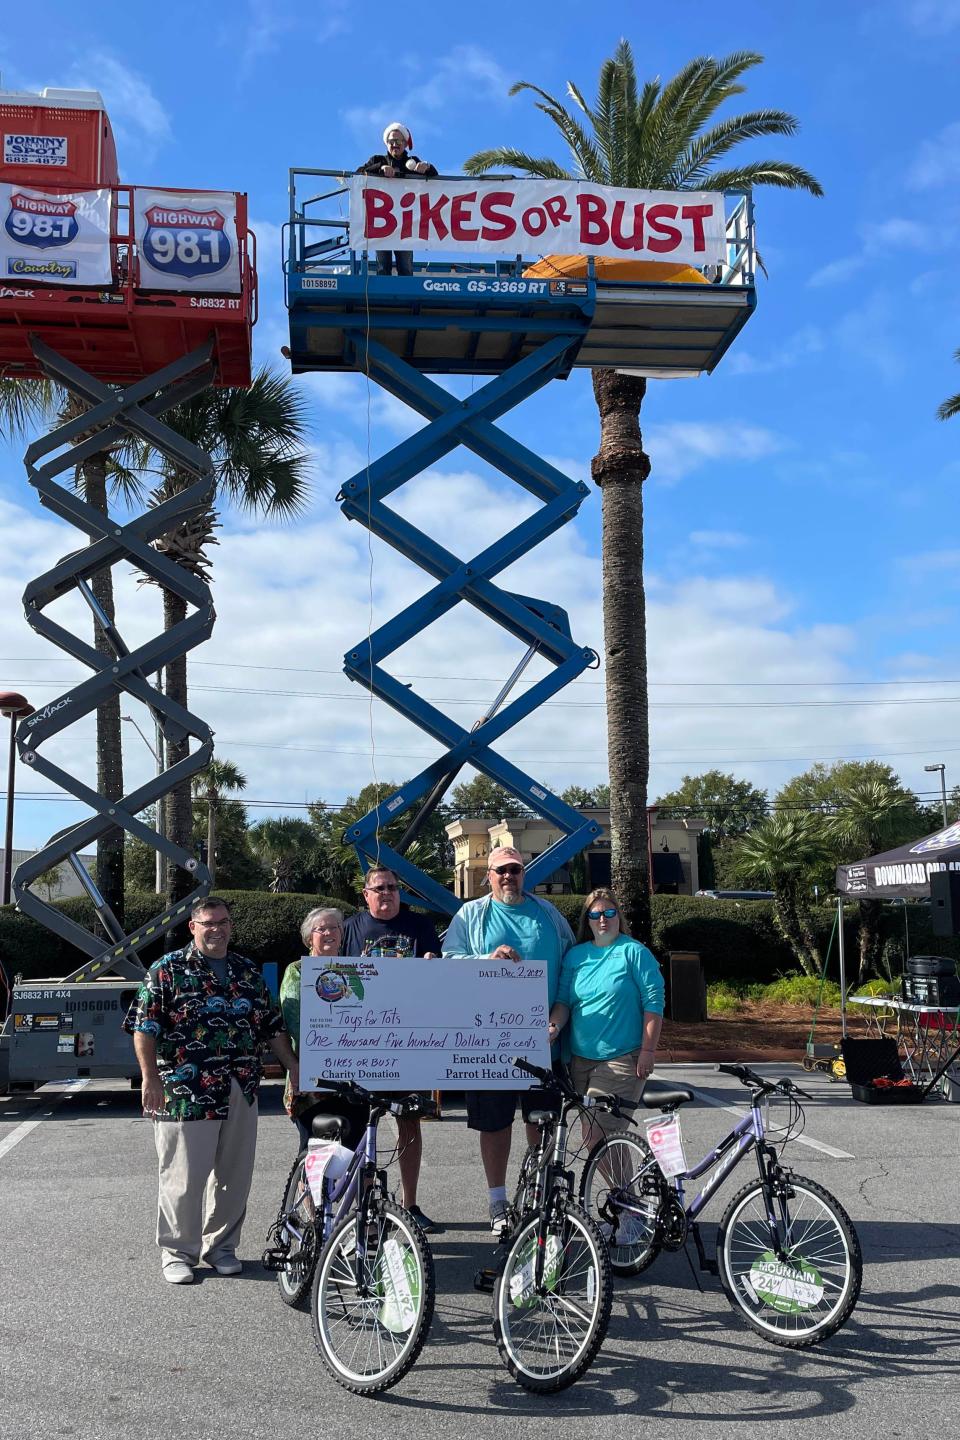 Members of the Emerald Coast Parrotthead Club were among the first to donate to "Bikes or Bust,"  an annual bicycle fundraiser put on by JVC Broadcasting's Highway 98 Country radio station. The event began Friday morning and runs through noon Tuesday, and on-air personality Bo Reynolds will spend 98 hours living atop this construction lift at Uptown Station in order encourage listeners to donate bicycles to Emerald Coast Toys for Tots.